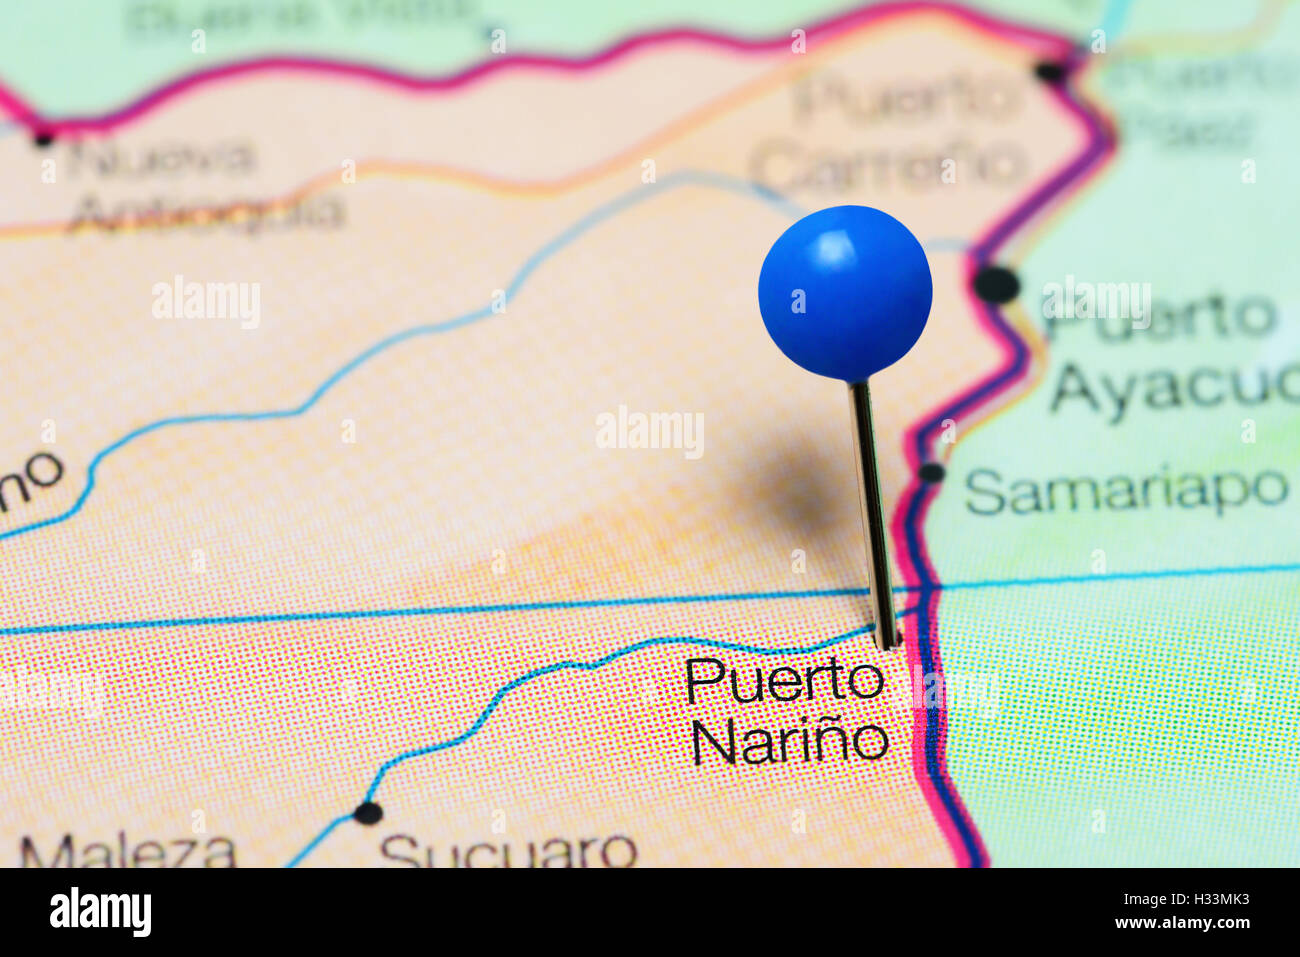 Puerto Narino pinned on a map of Colombia Stock Photo